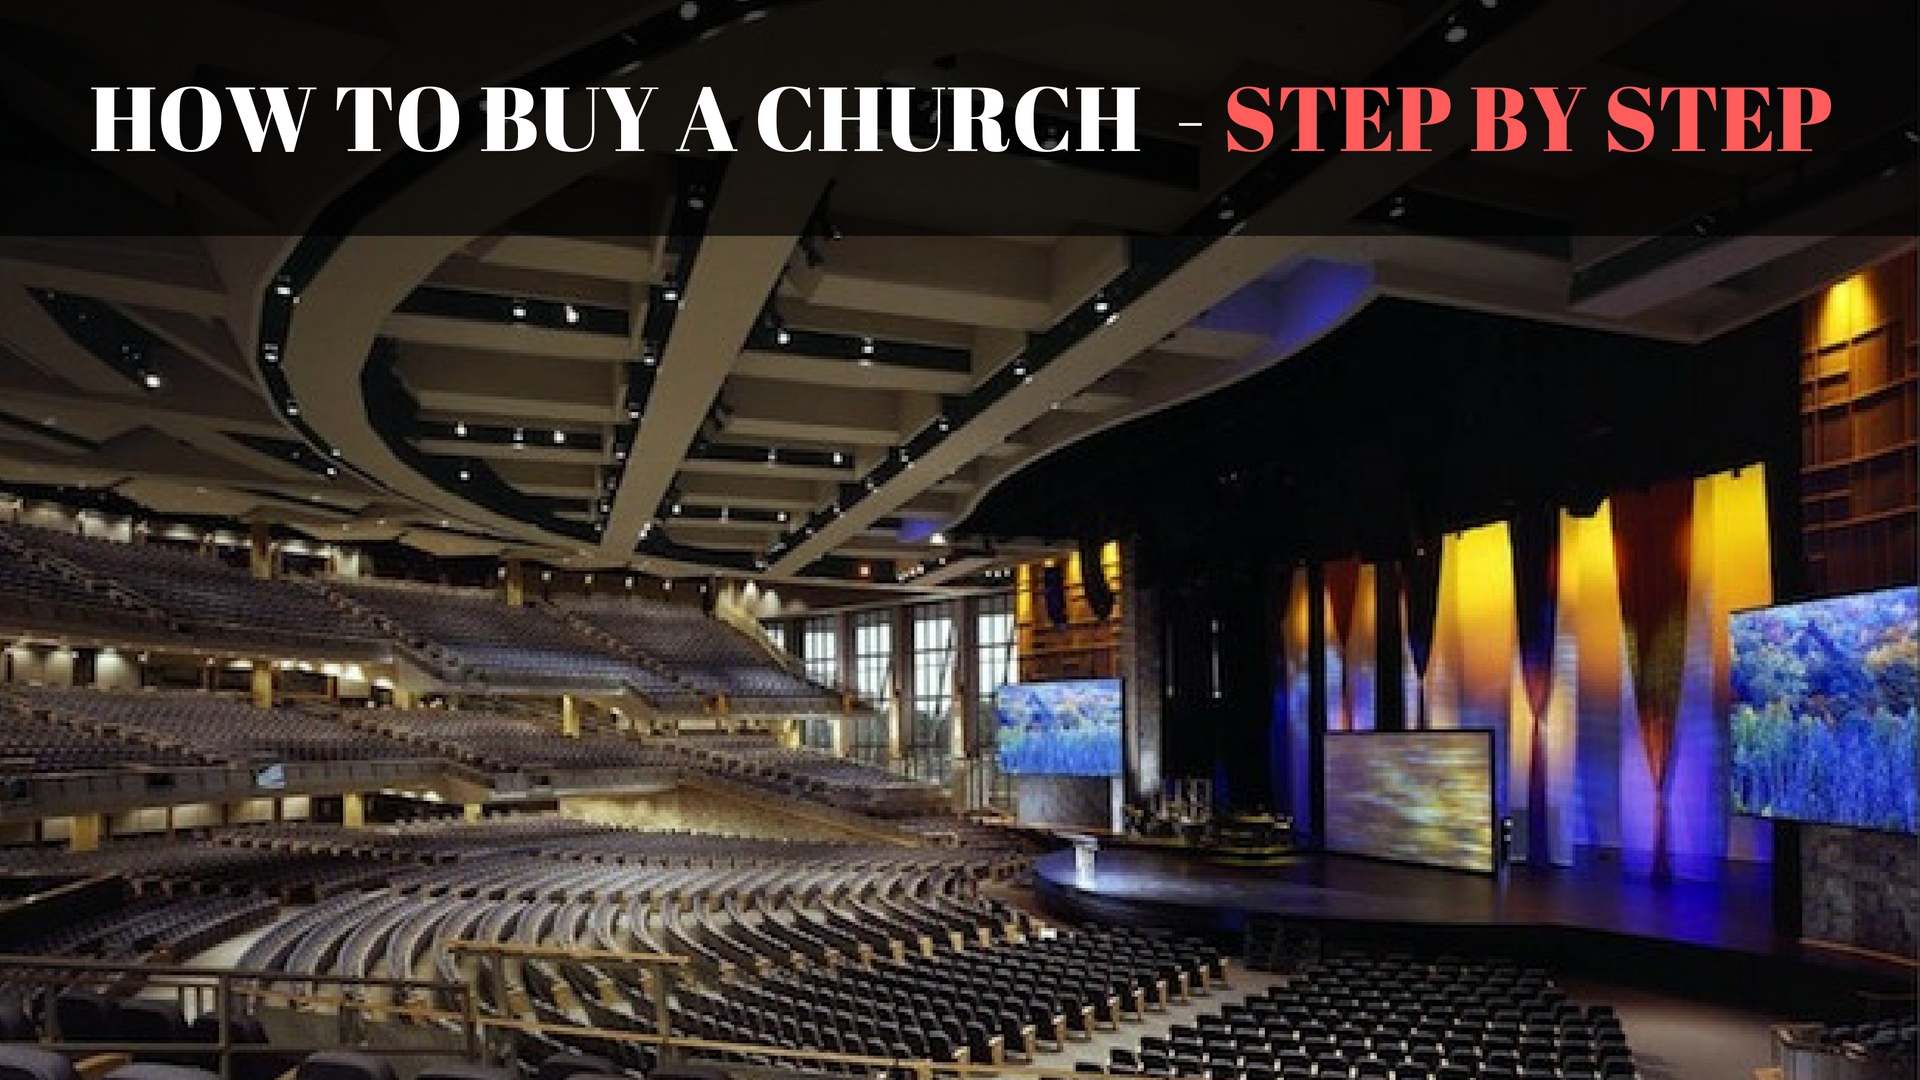 HOW_TO_BUY_A_CHURCH_-_STEP_BY_STEP.jpg